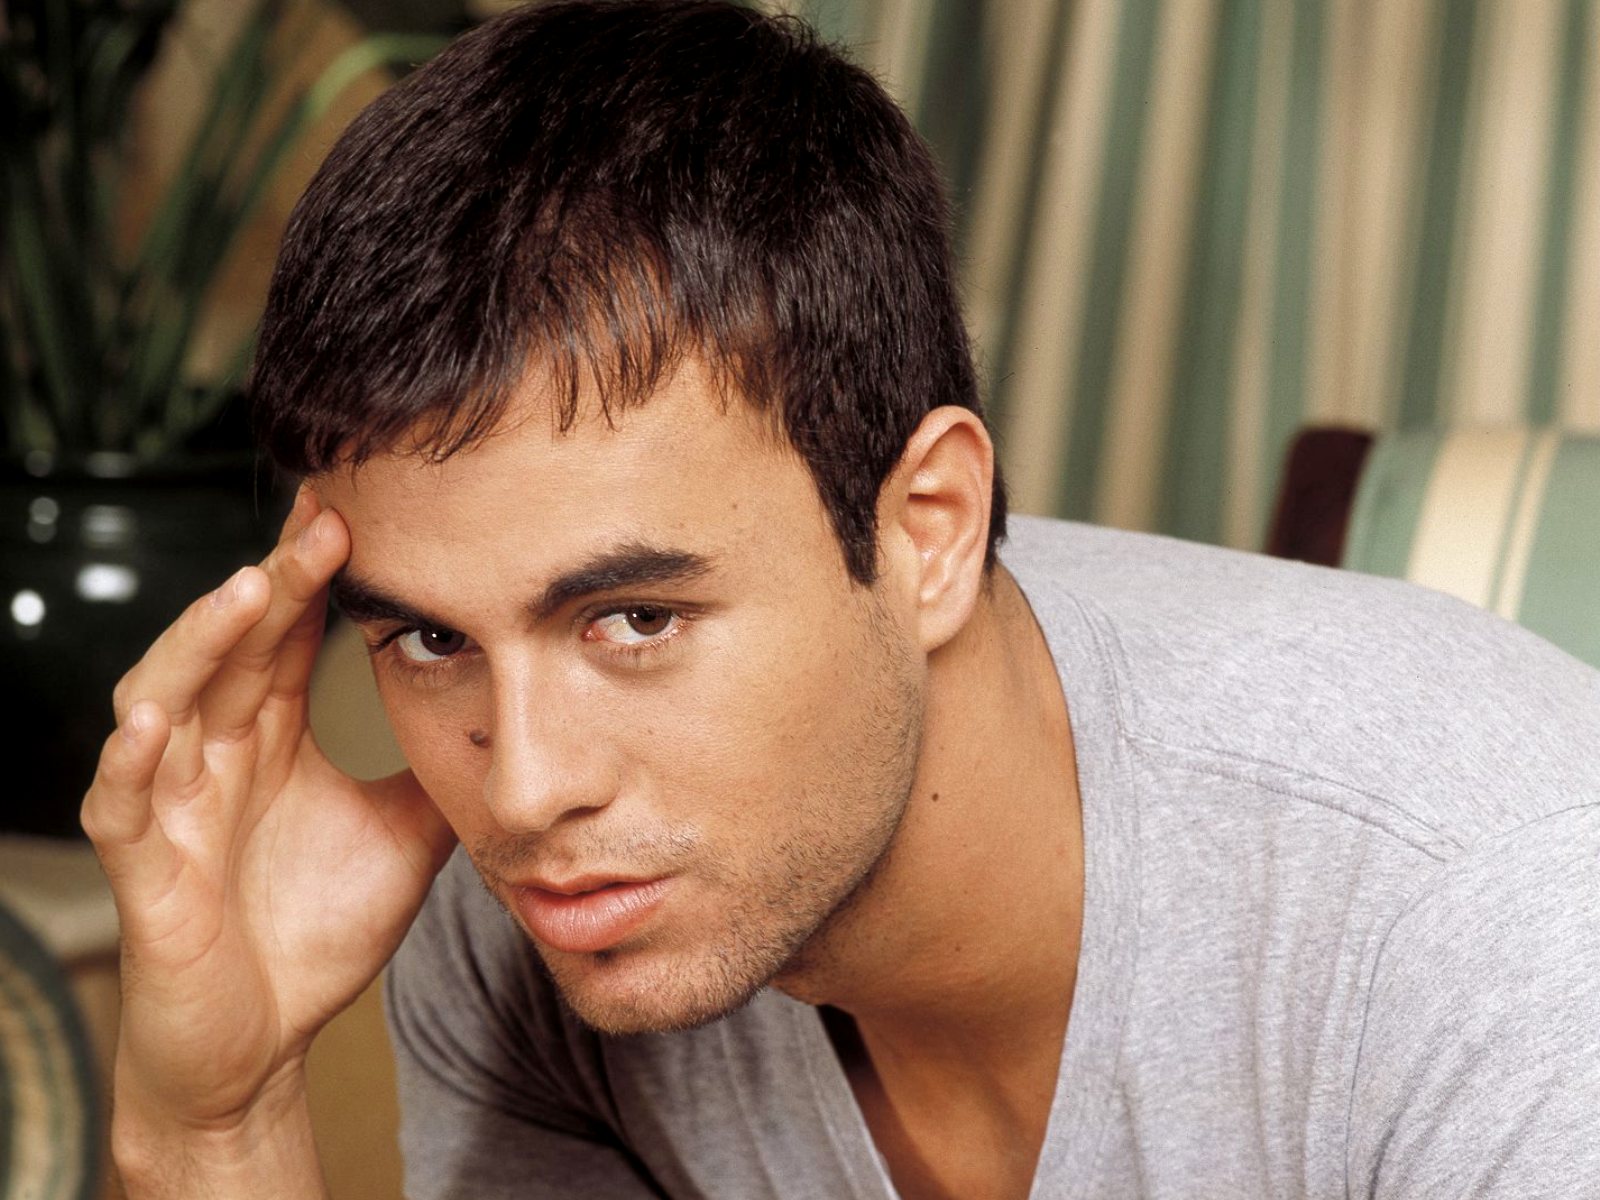 At the dawn of the new millennium, Enrique Iglesias was the best-selling Latin recording artist in the world. The son of multi-million-selling singer Julio ...